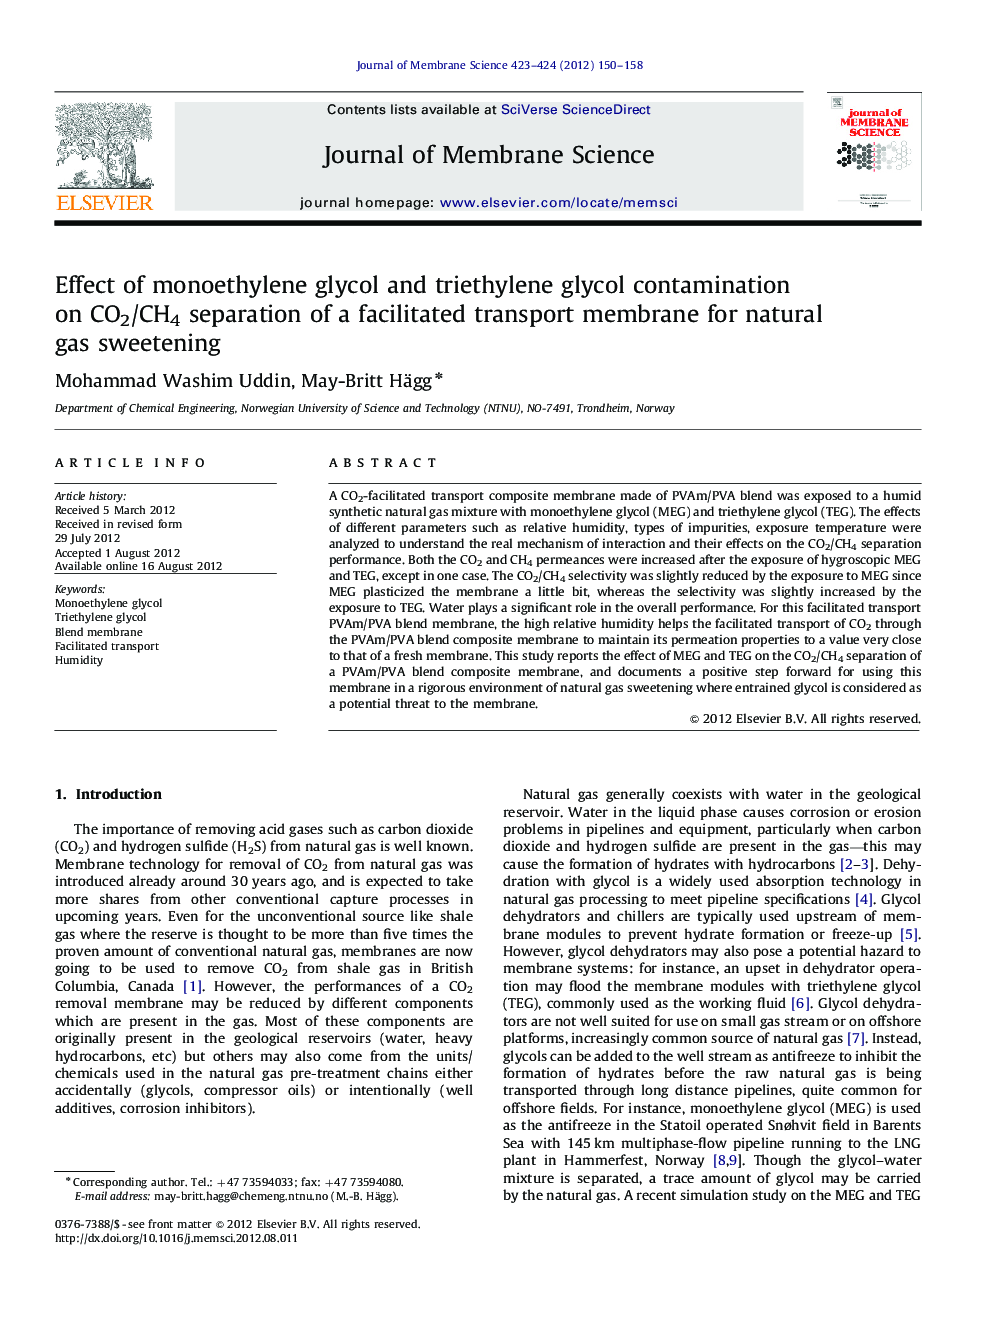 Effect of monoethylene glycol and triethylene glycol contamination on CO2/CH4 separation of a facilitated transport membrane for natural gas sweetening